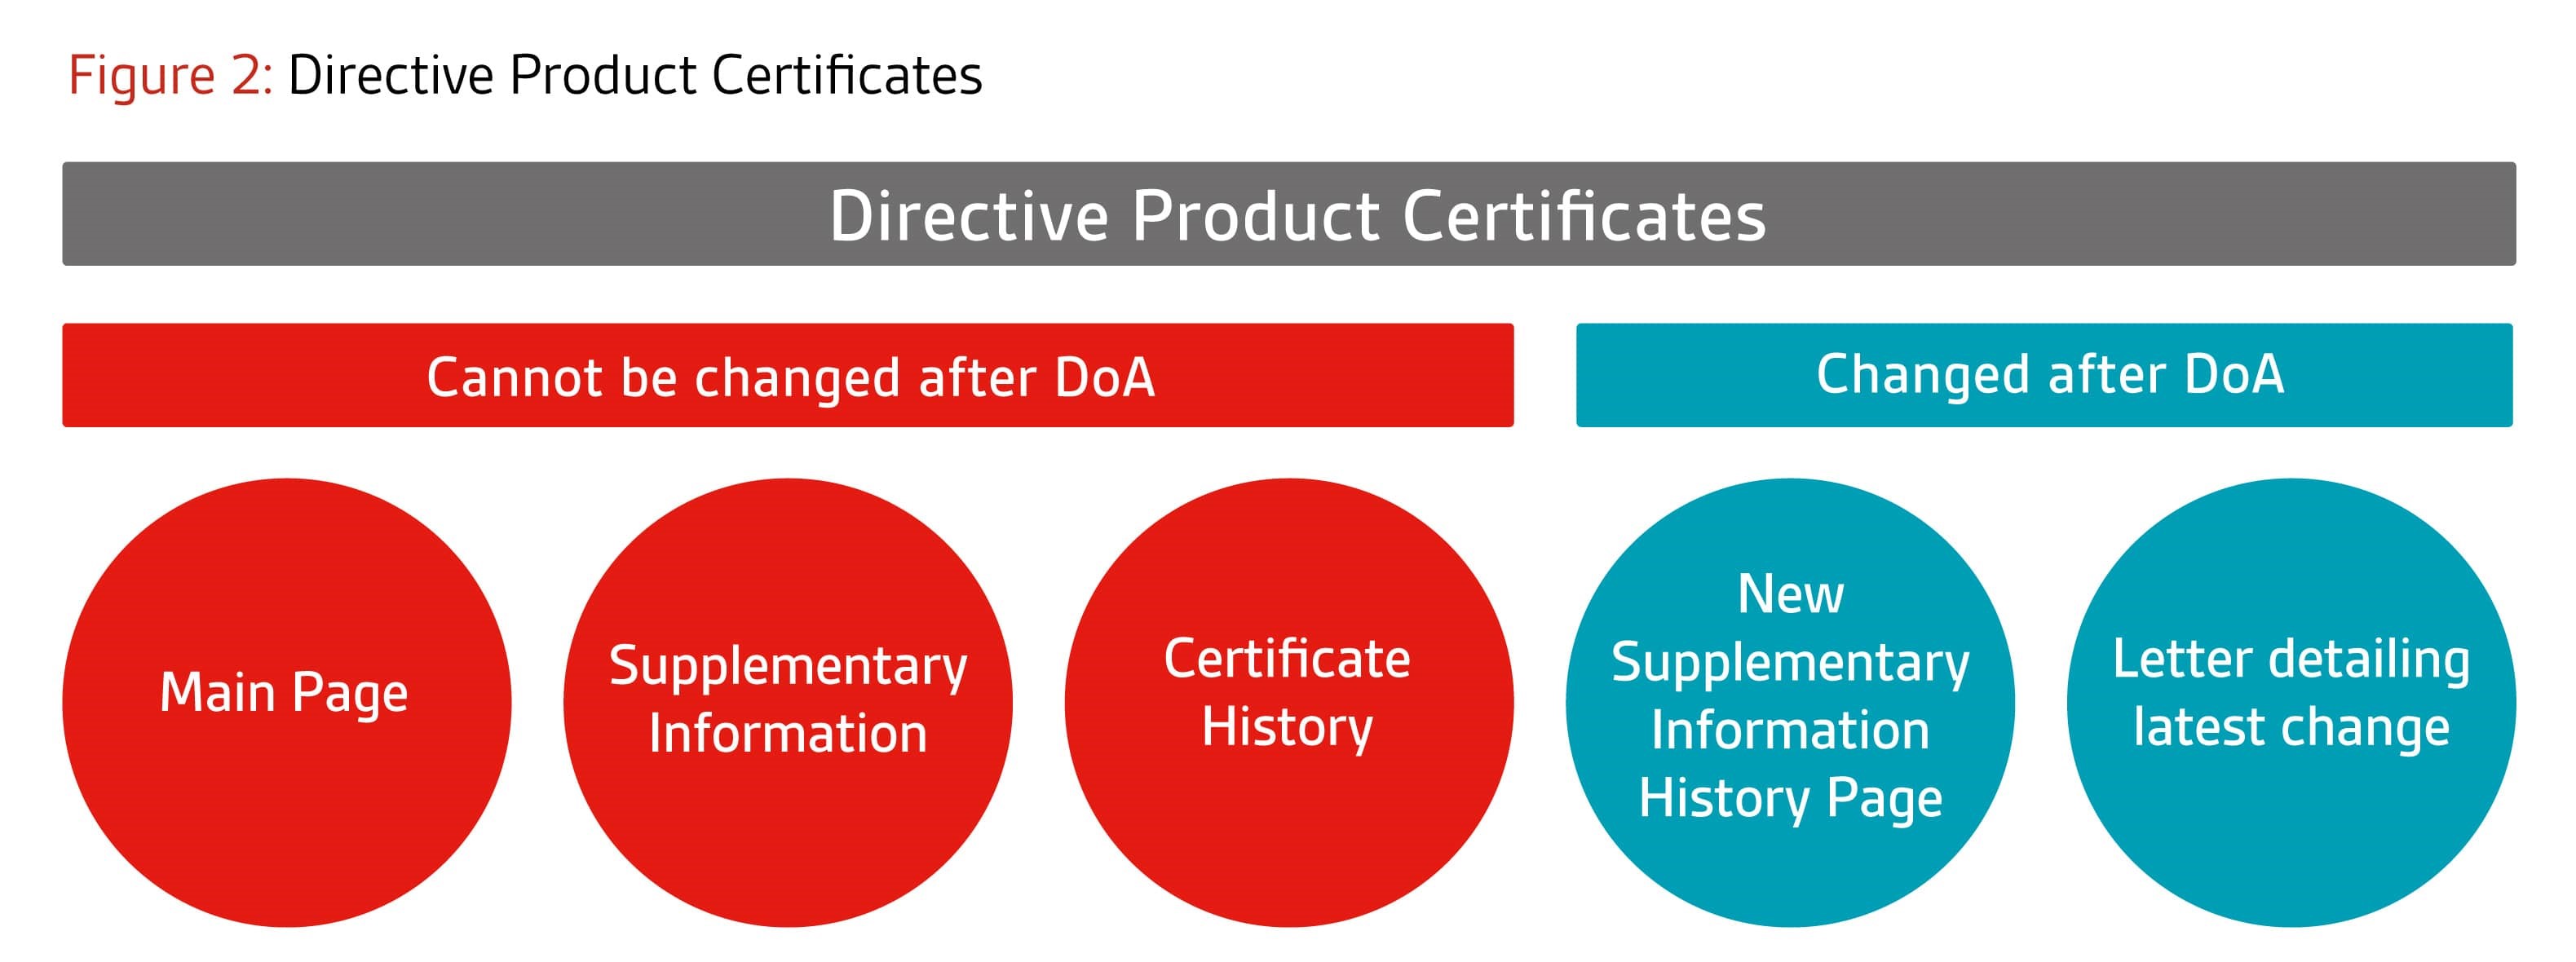 Certificates based on quality system annexes (e.g. full quality assurance certificates)